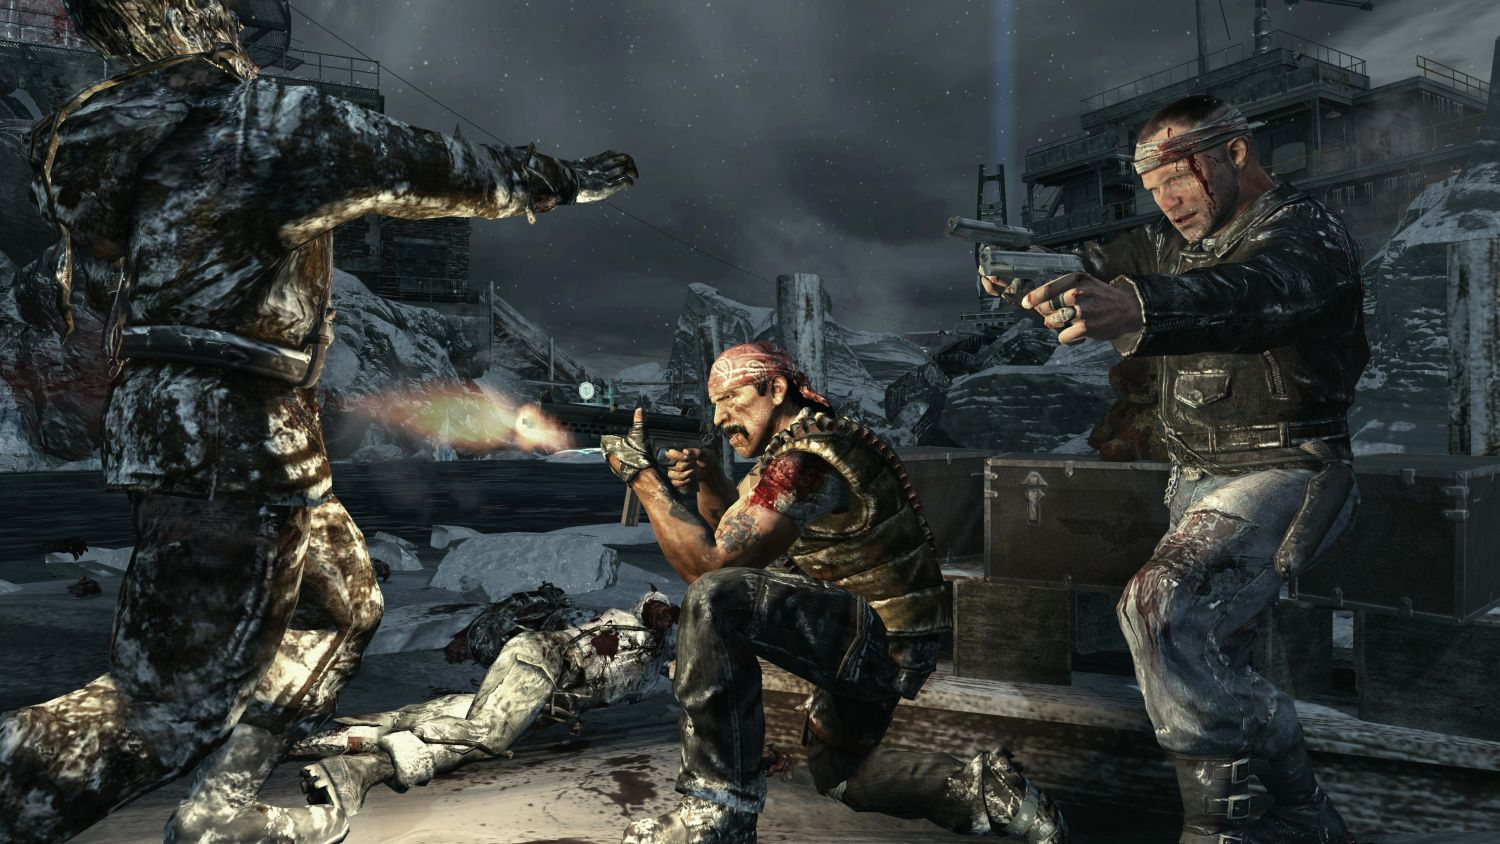 Unraveling the bizarre plot of Call of Dutys Zombies mode